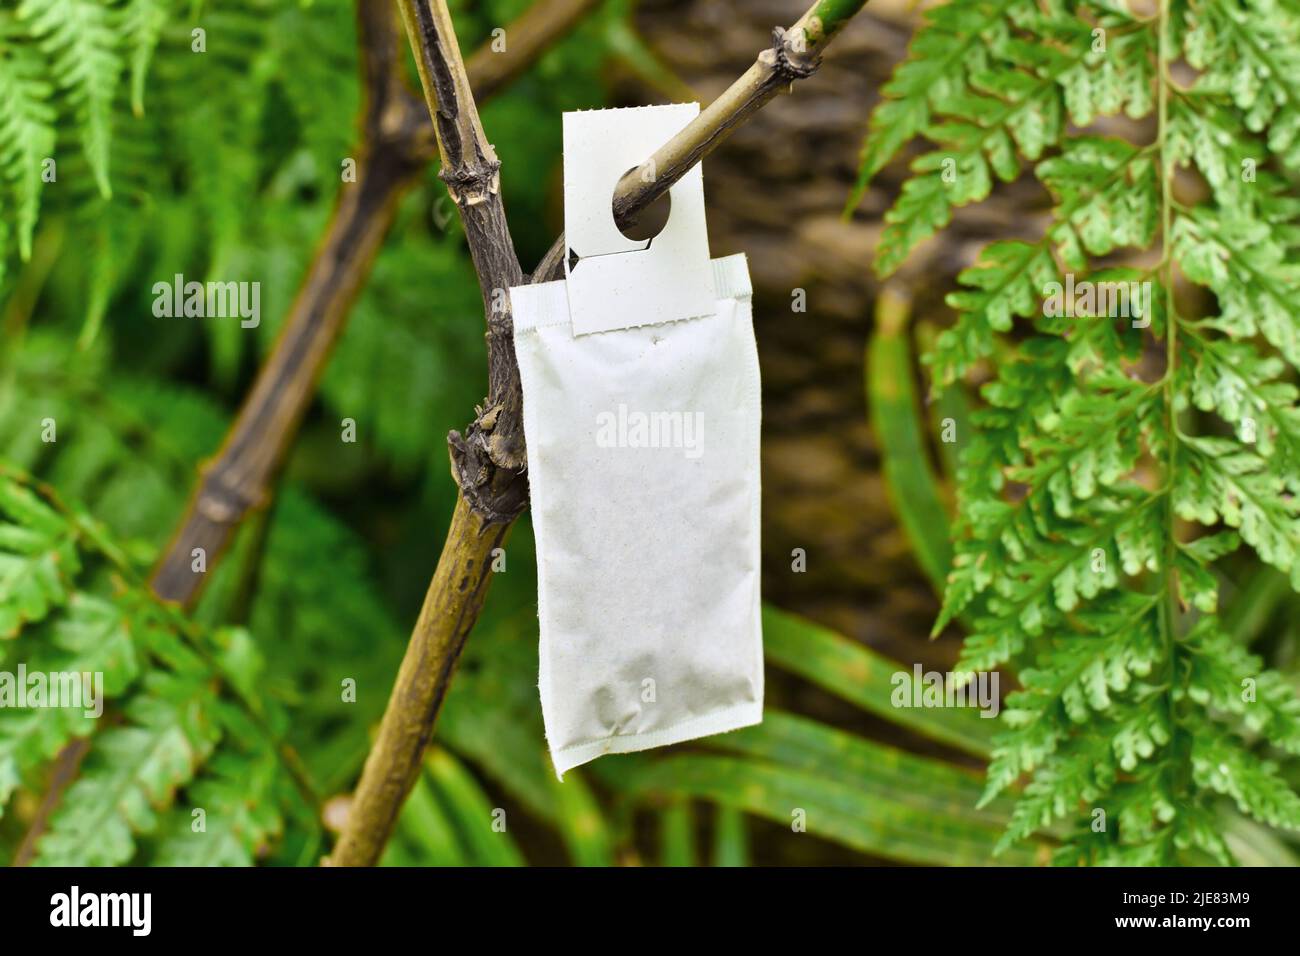 Sachet with beneficial predatory mites used for pest control attached to plant Stock Photo